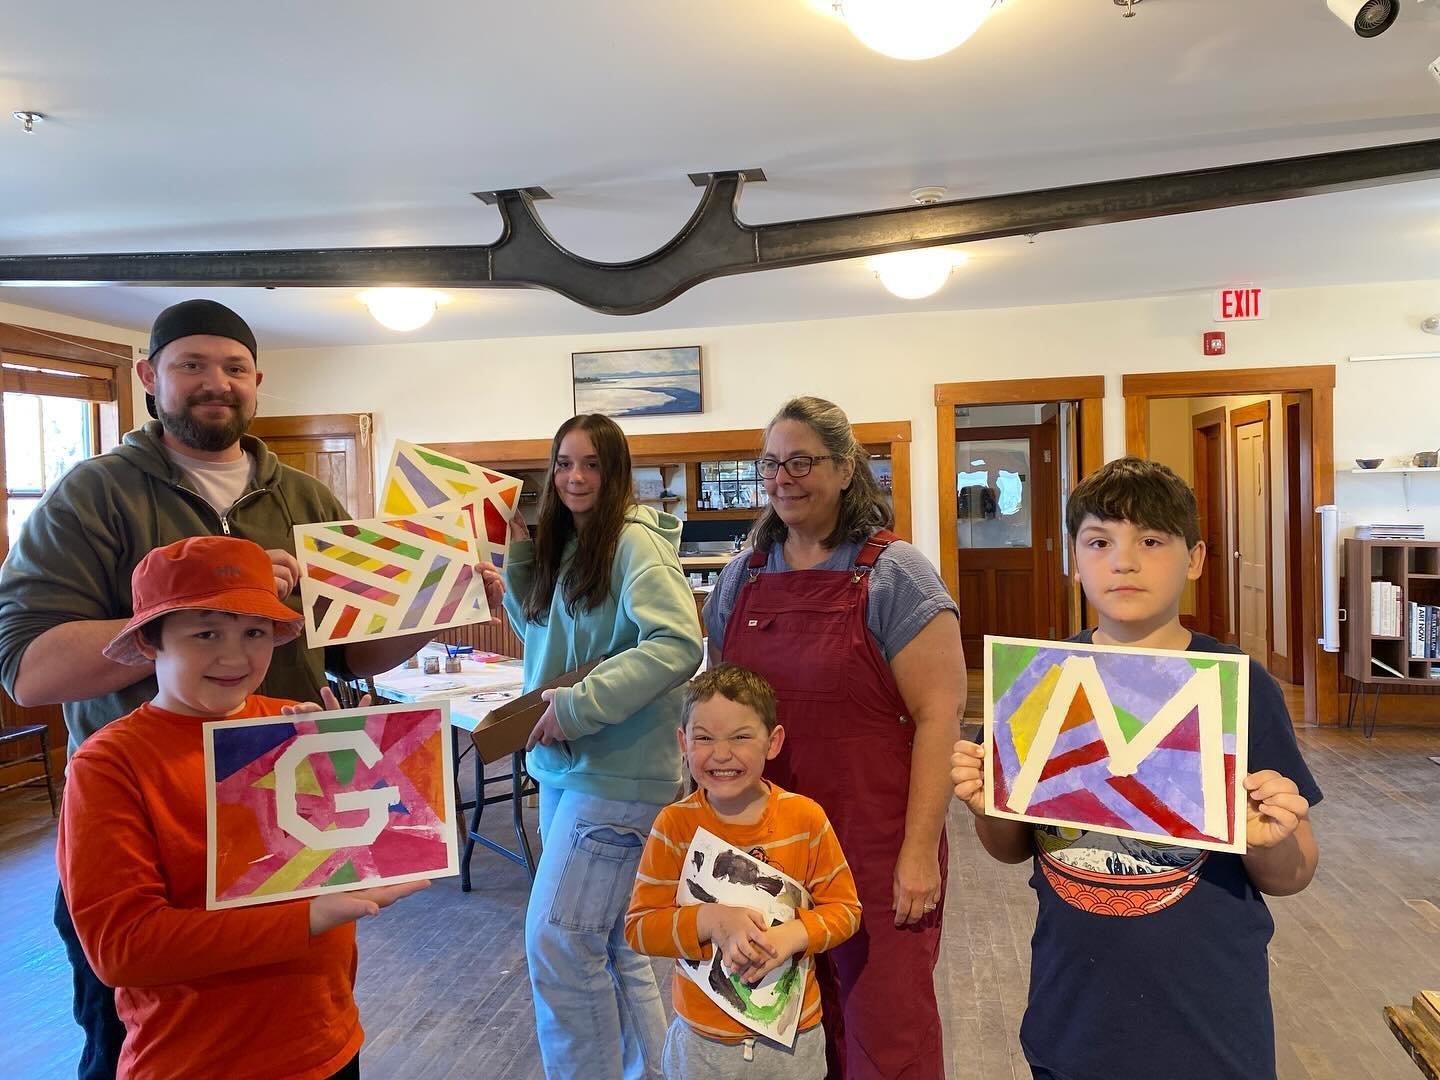 Morristown Free University was teeming with creativity and smiles during our neurodivergent art class for kids and caregivers today! 🎨💜
.
#riverartsvt #yourcommunityartcenter #makeart #artforeveryone #freeartclasses #mfu #morristownfreeuniveristy #